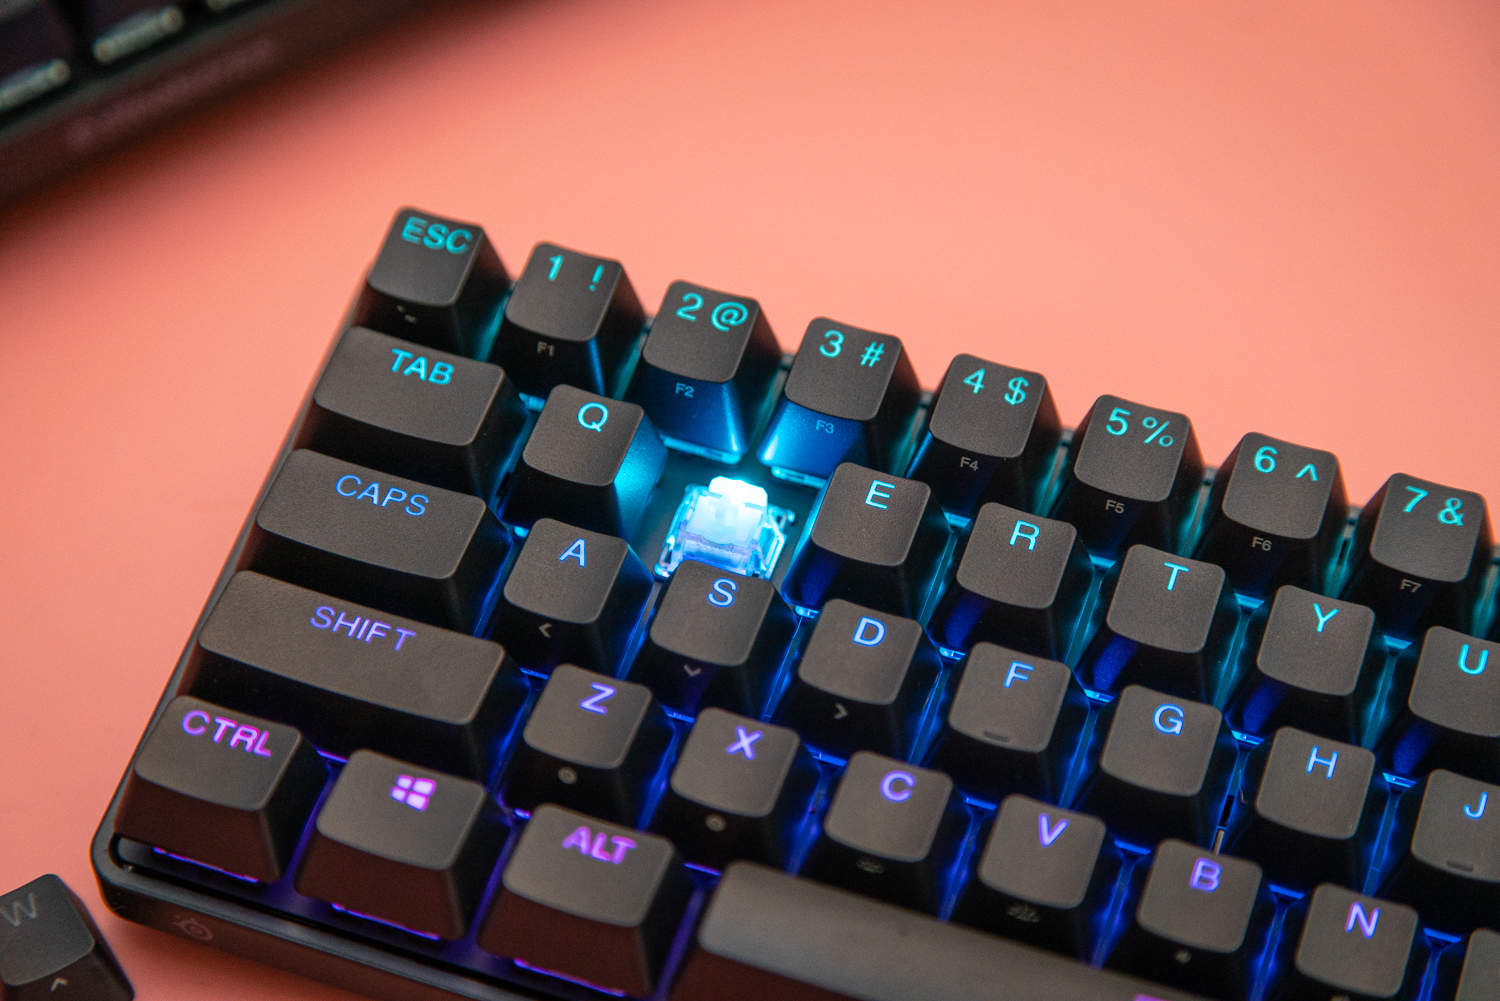 SteelSeries Apex Pro Mini Review: Everything and the Kitchen Sink